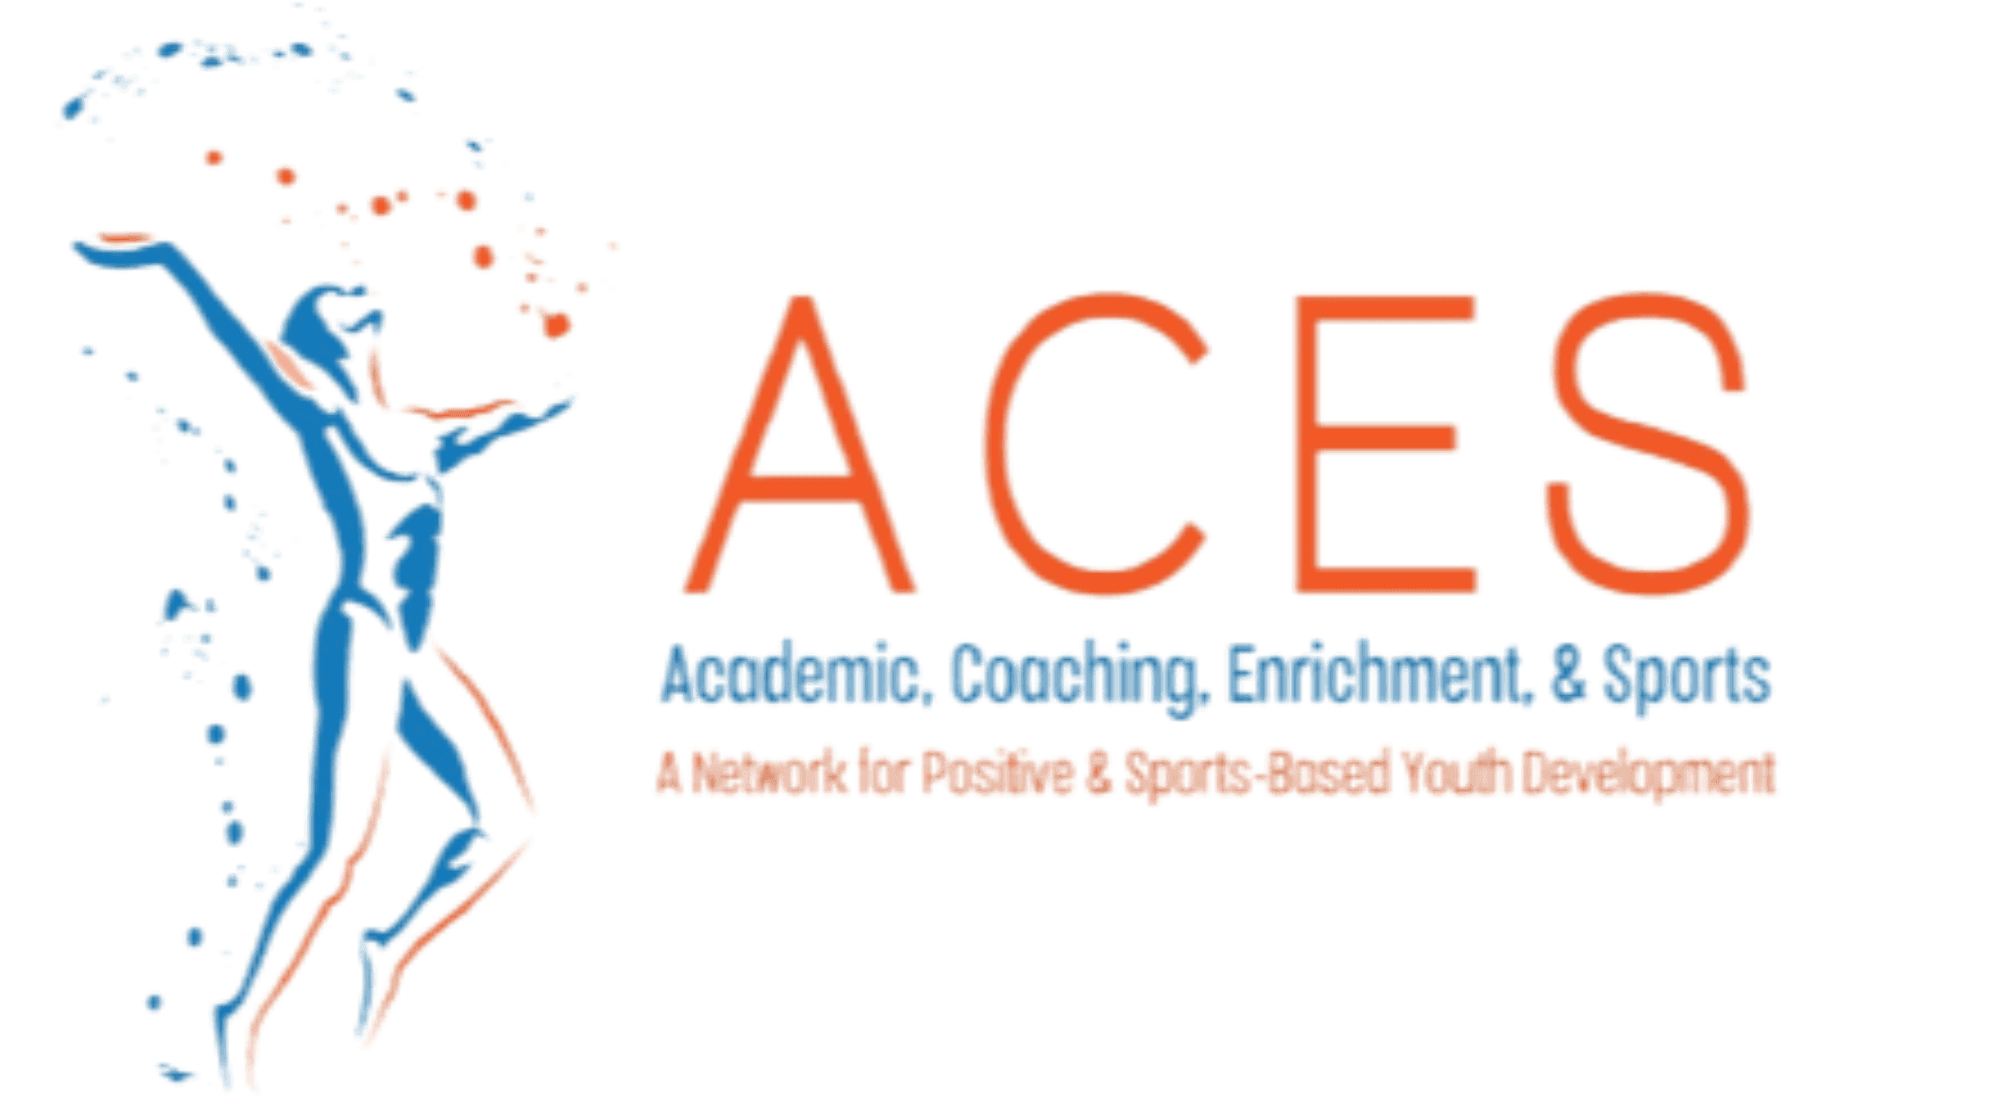 The ACES Network